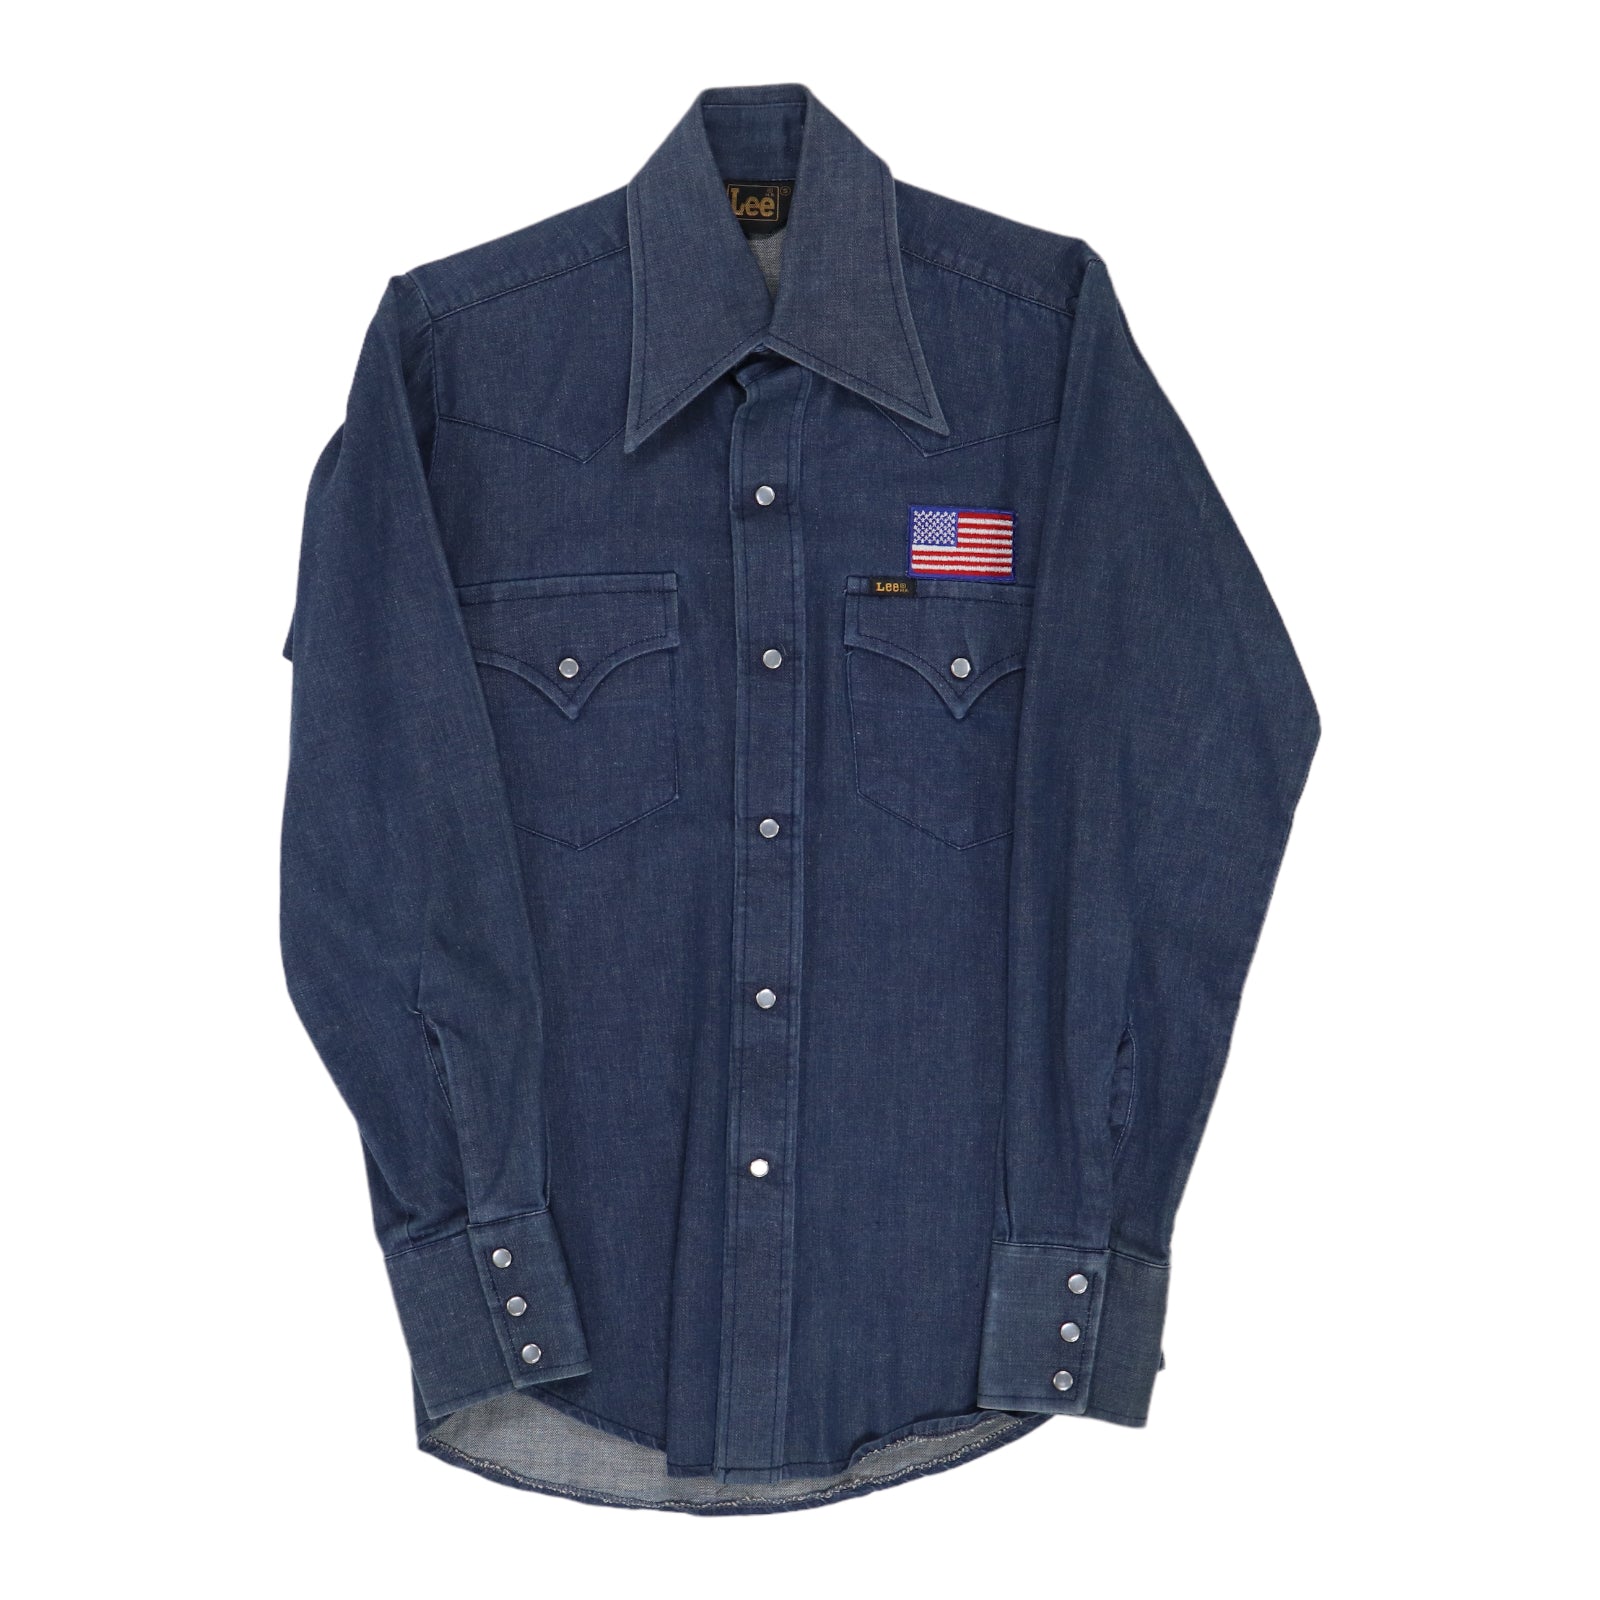 DC4 - THE FLAT HEAD - 10oz Selvedge Denim - Natural Mother of Pearl Snaps -  Western Shirt